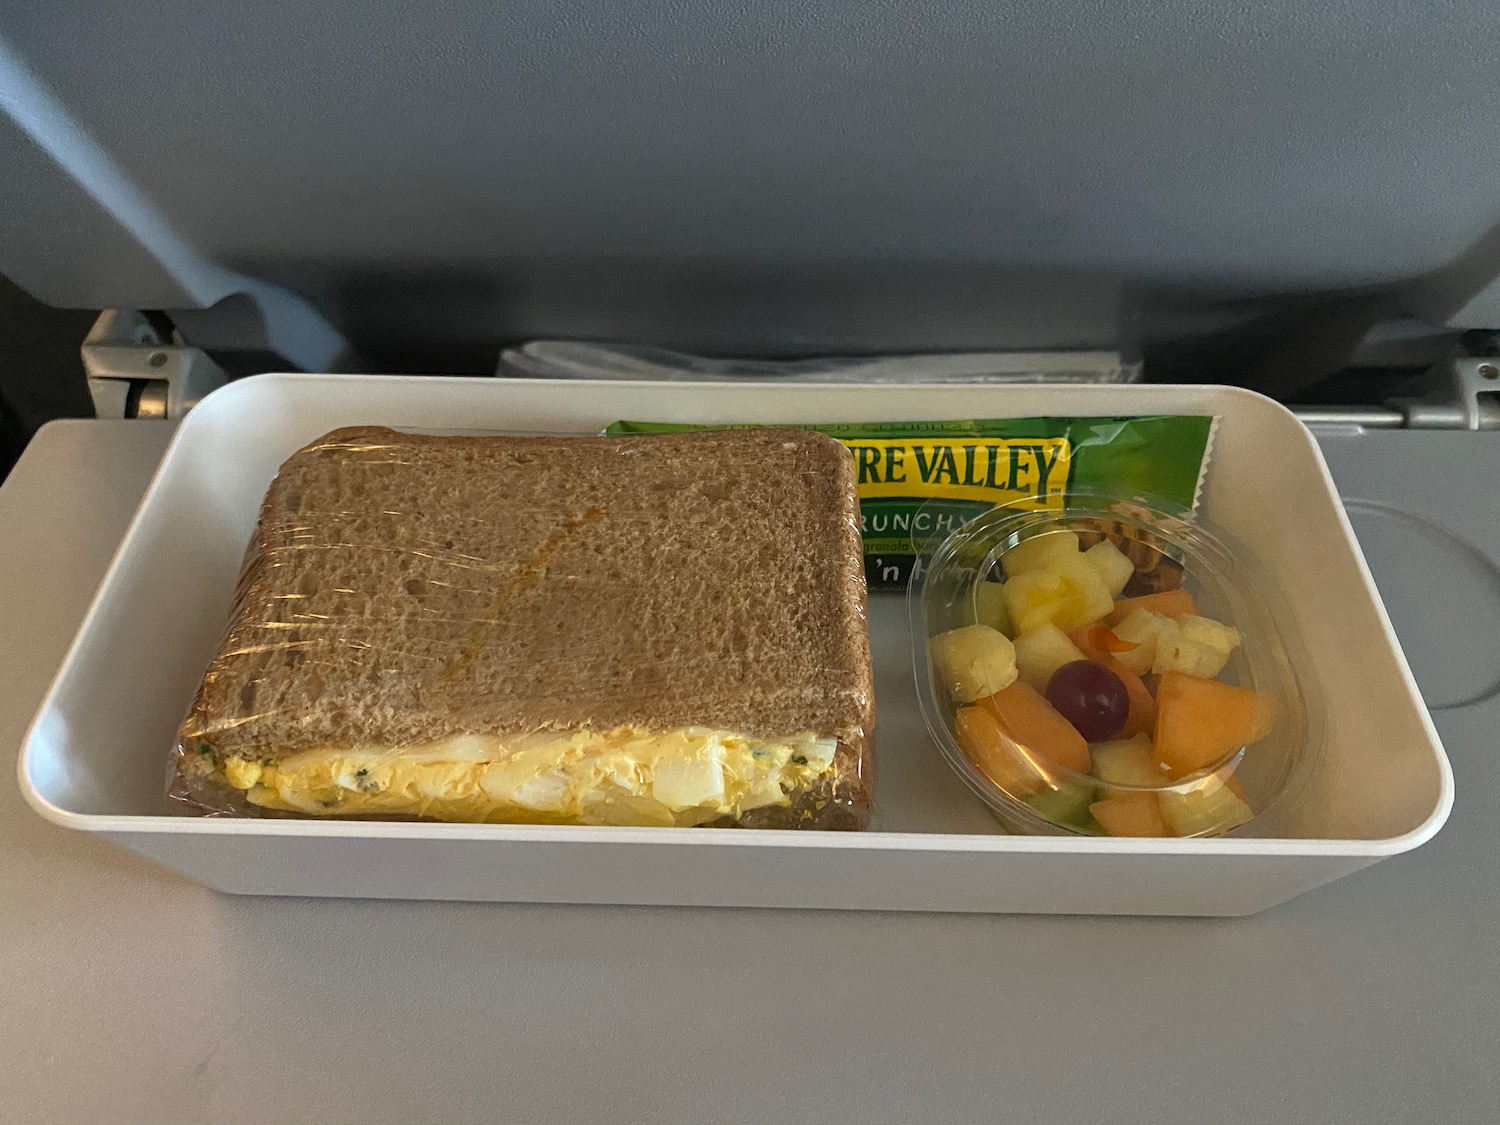 a sandwich and fruit in a tray